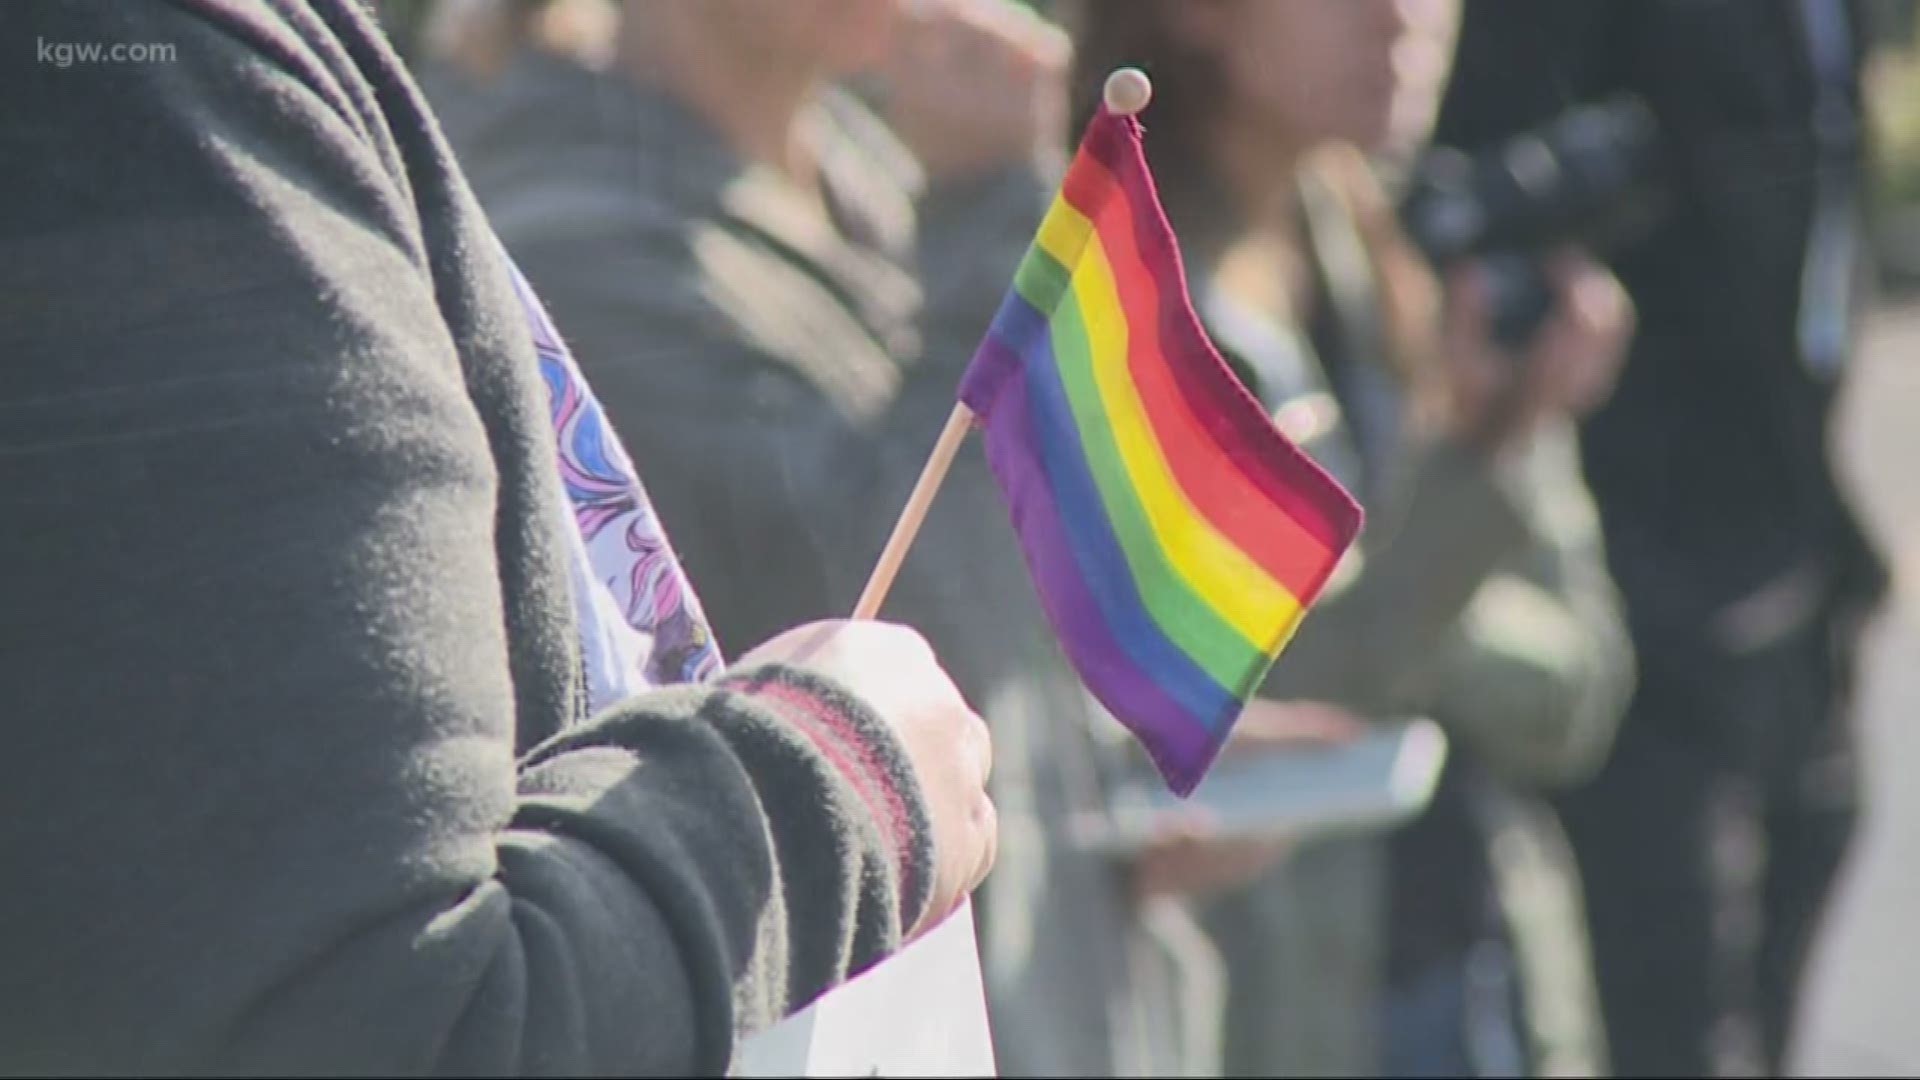 Students say they're tired of the bullying and vandalism they've been seeing against students who are part of the gender and sexuality alliance.